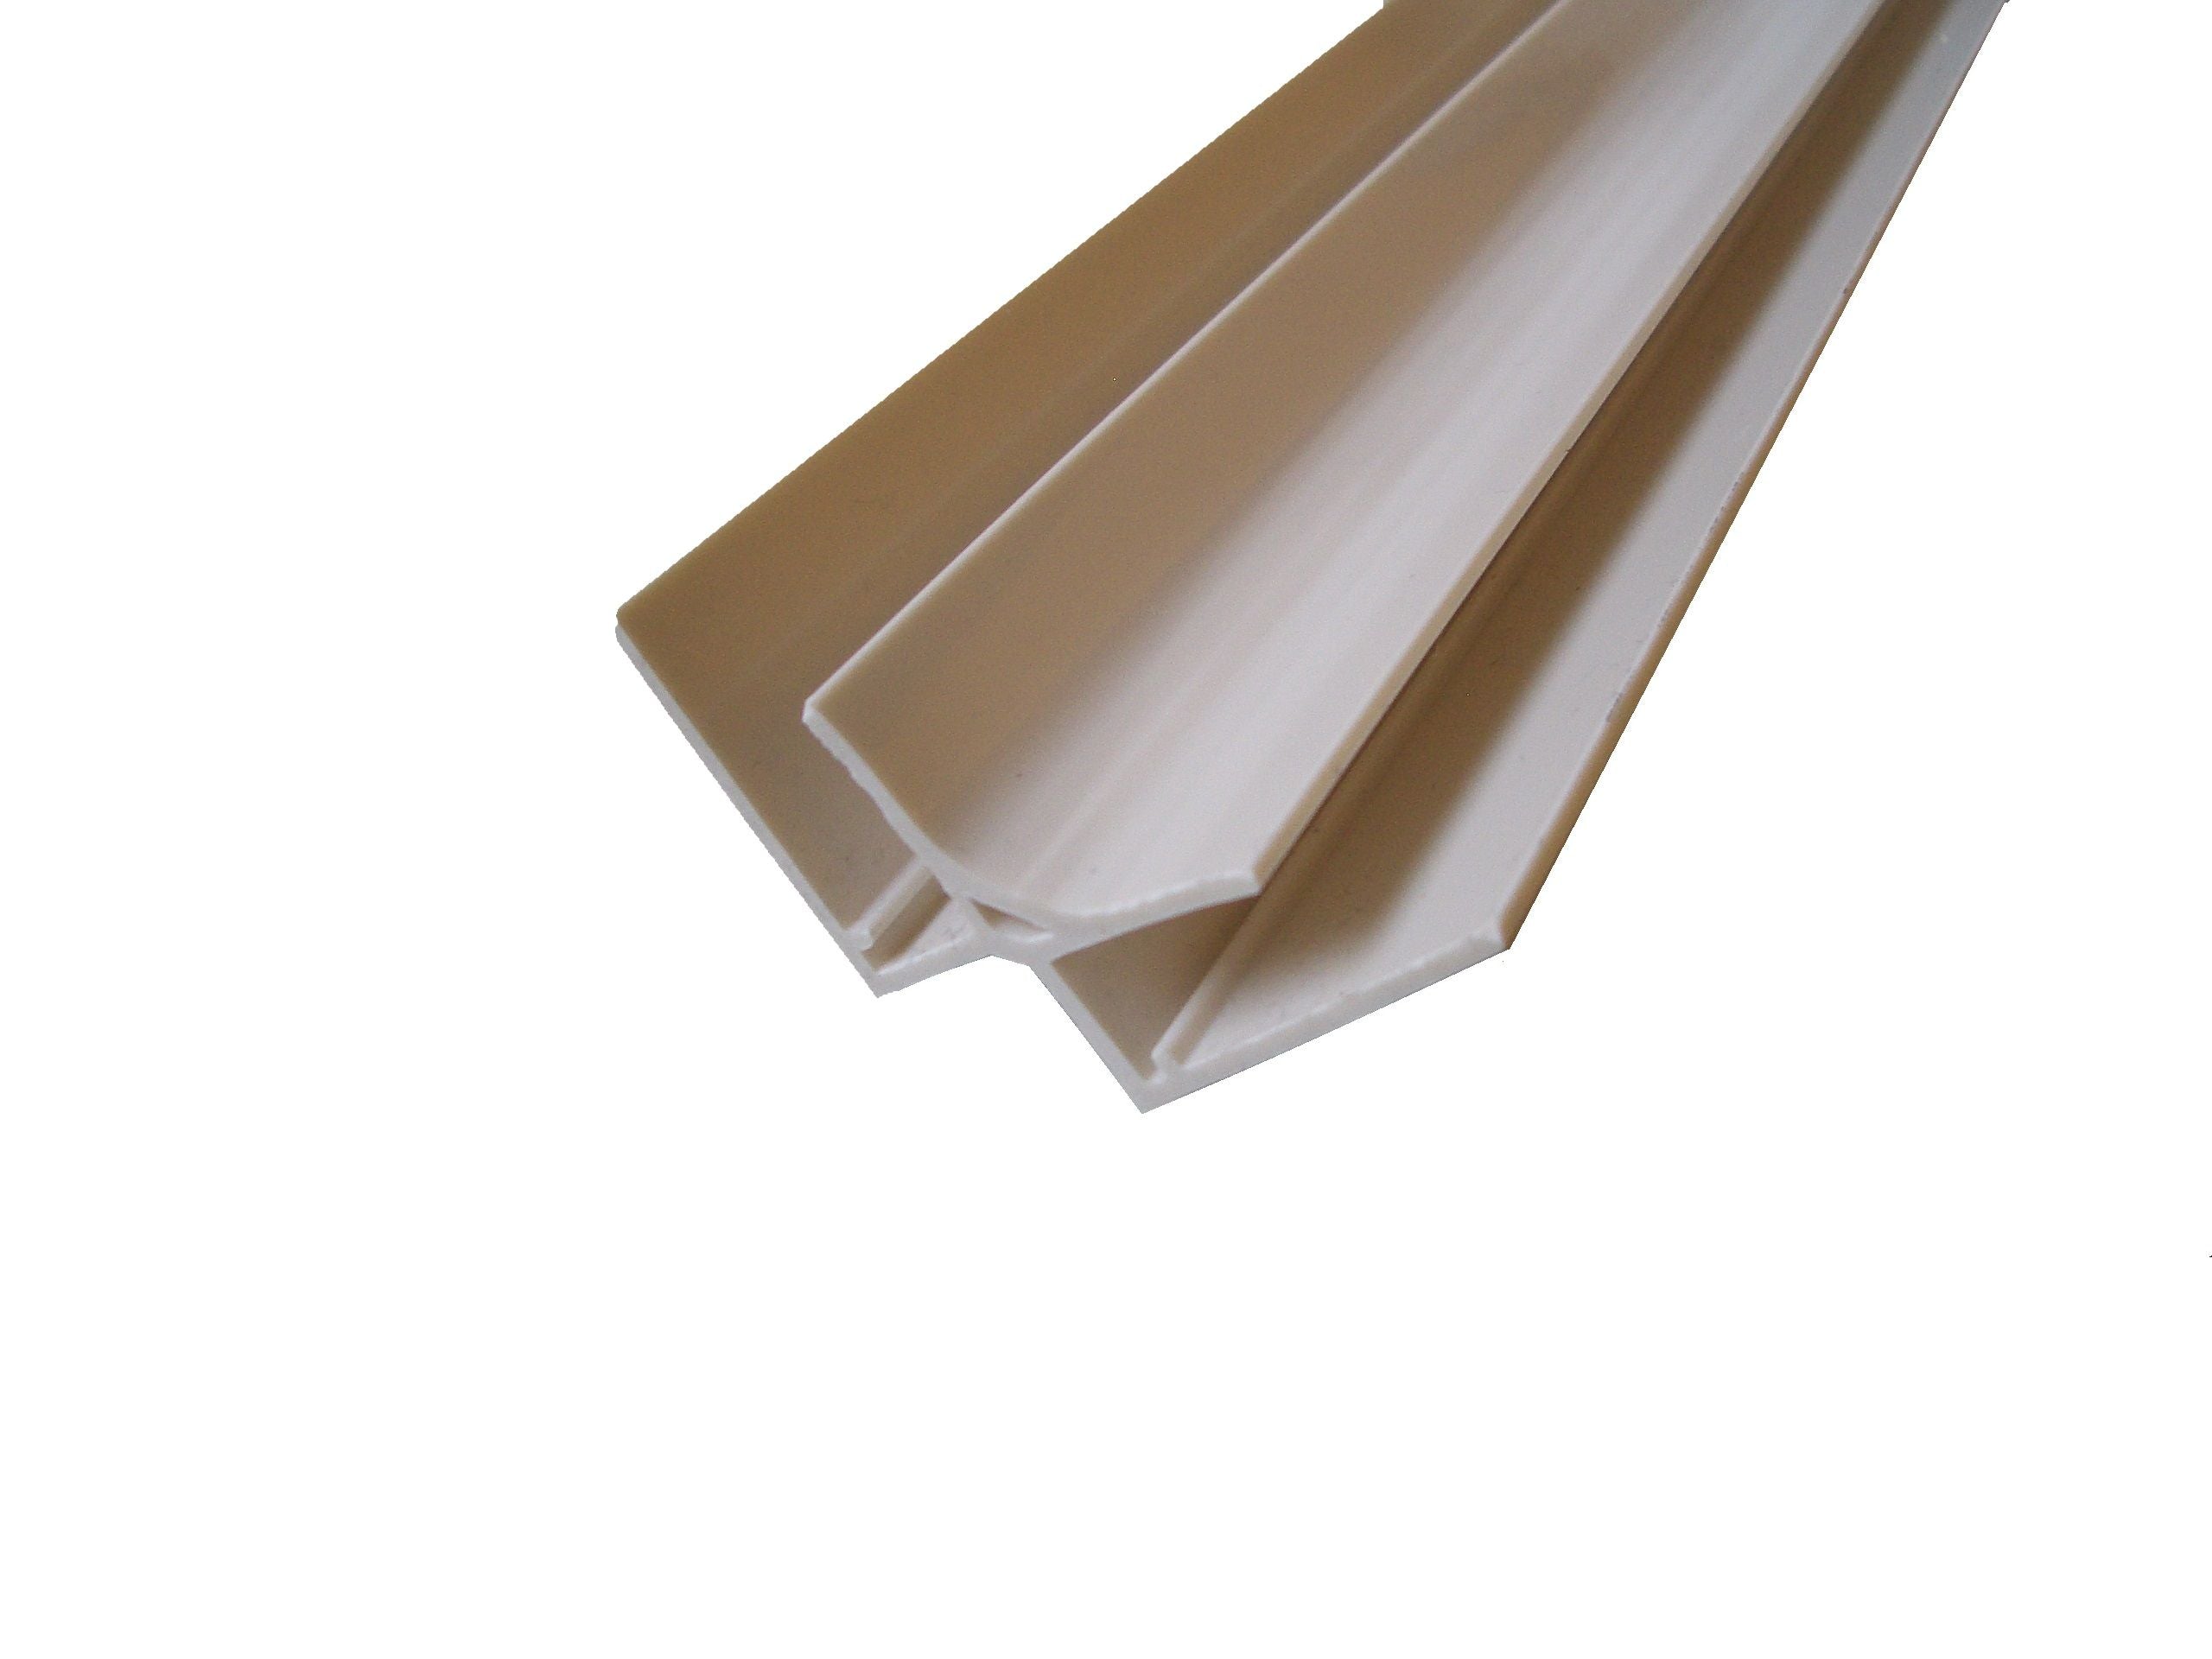 Cladding Worlds internal corner trims offer the perfect finish to complete the look of the panel in any room. 